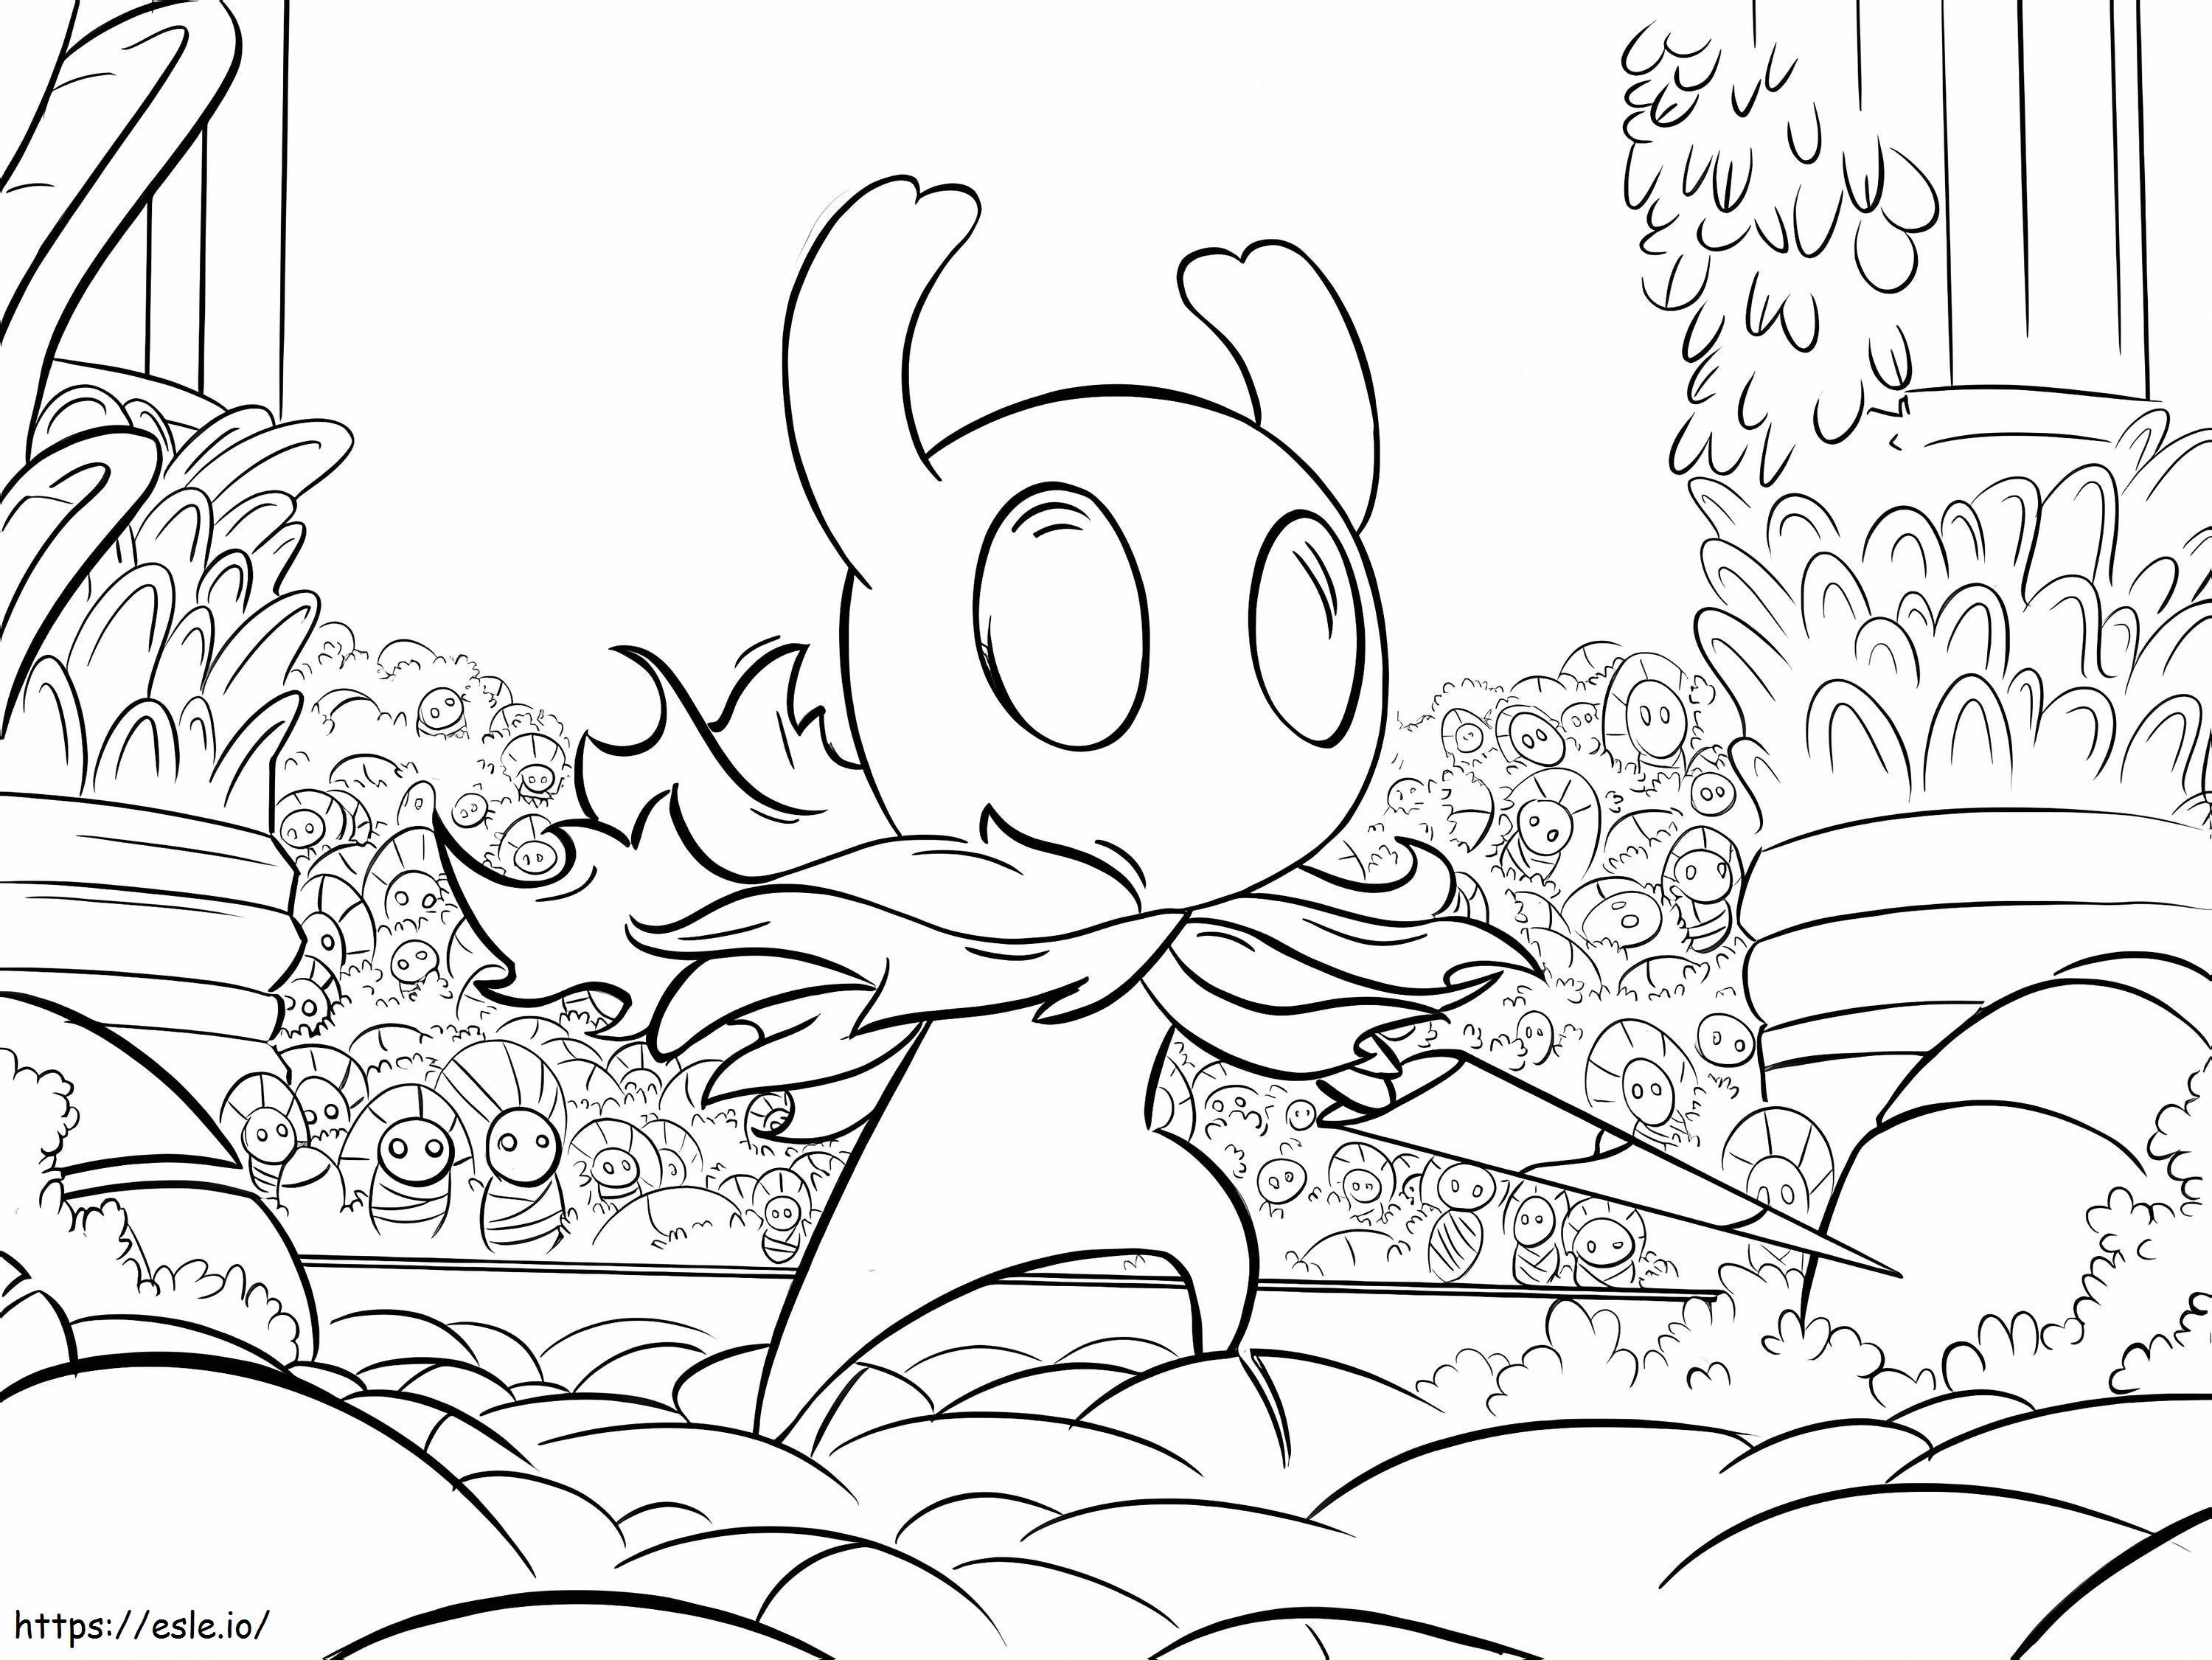 Hollow Knight 2 coloring page